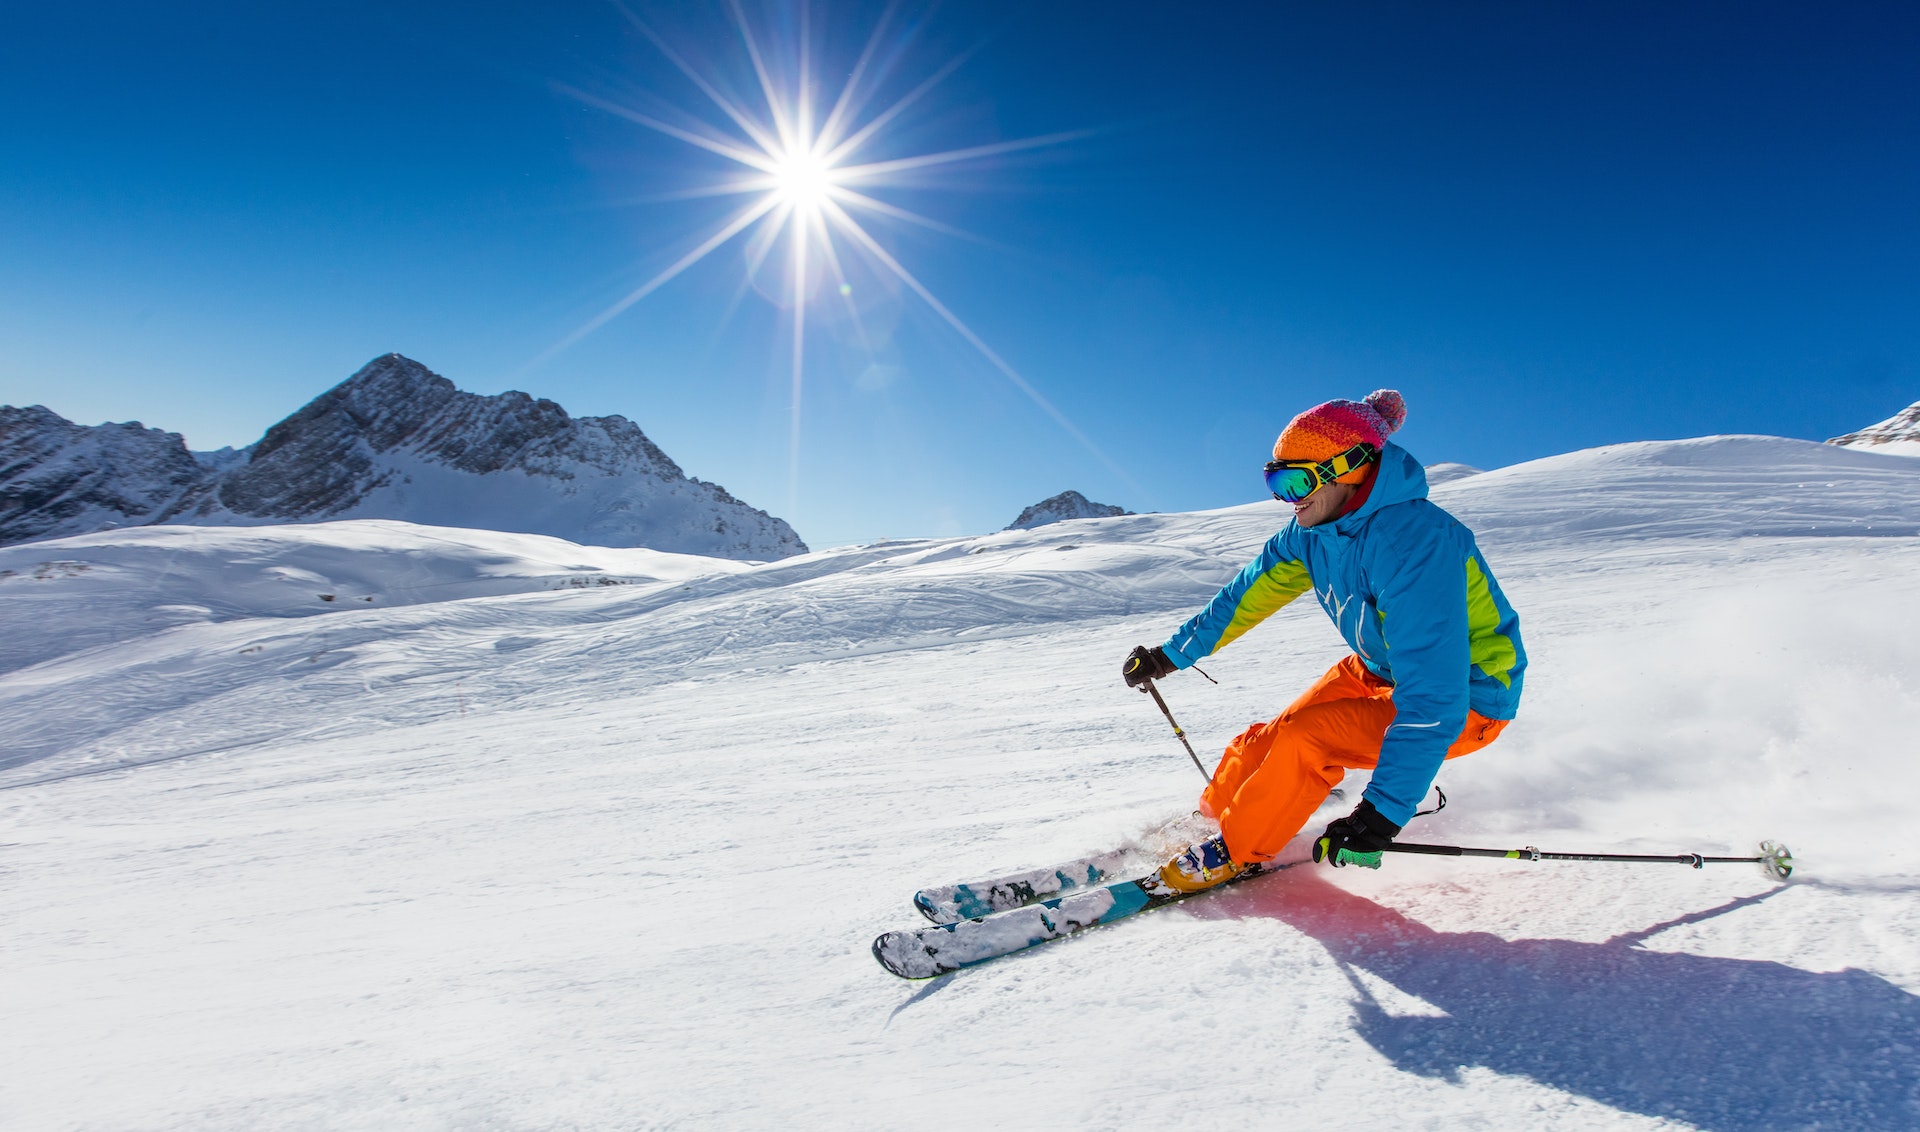 Skier skiing downhill during sunny day in high mountains in Italy 